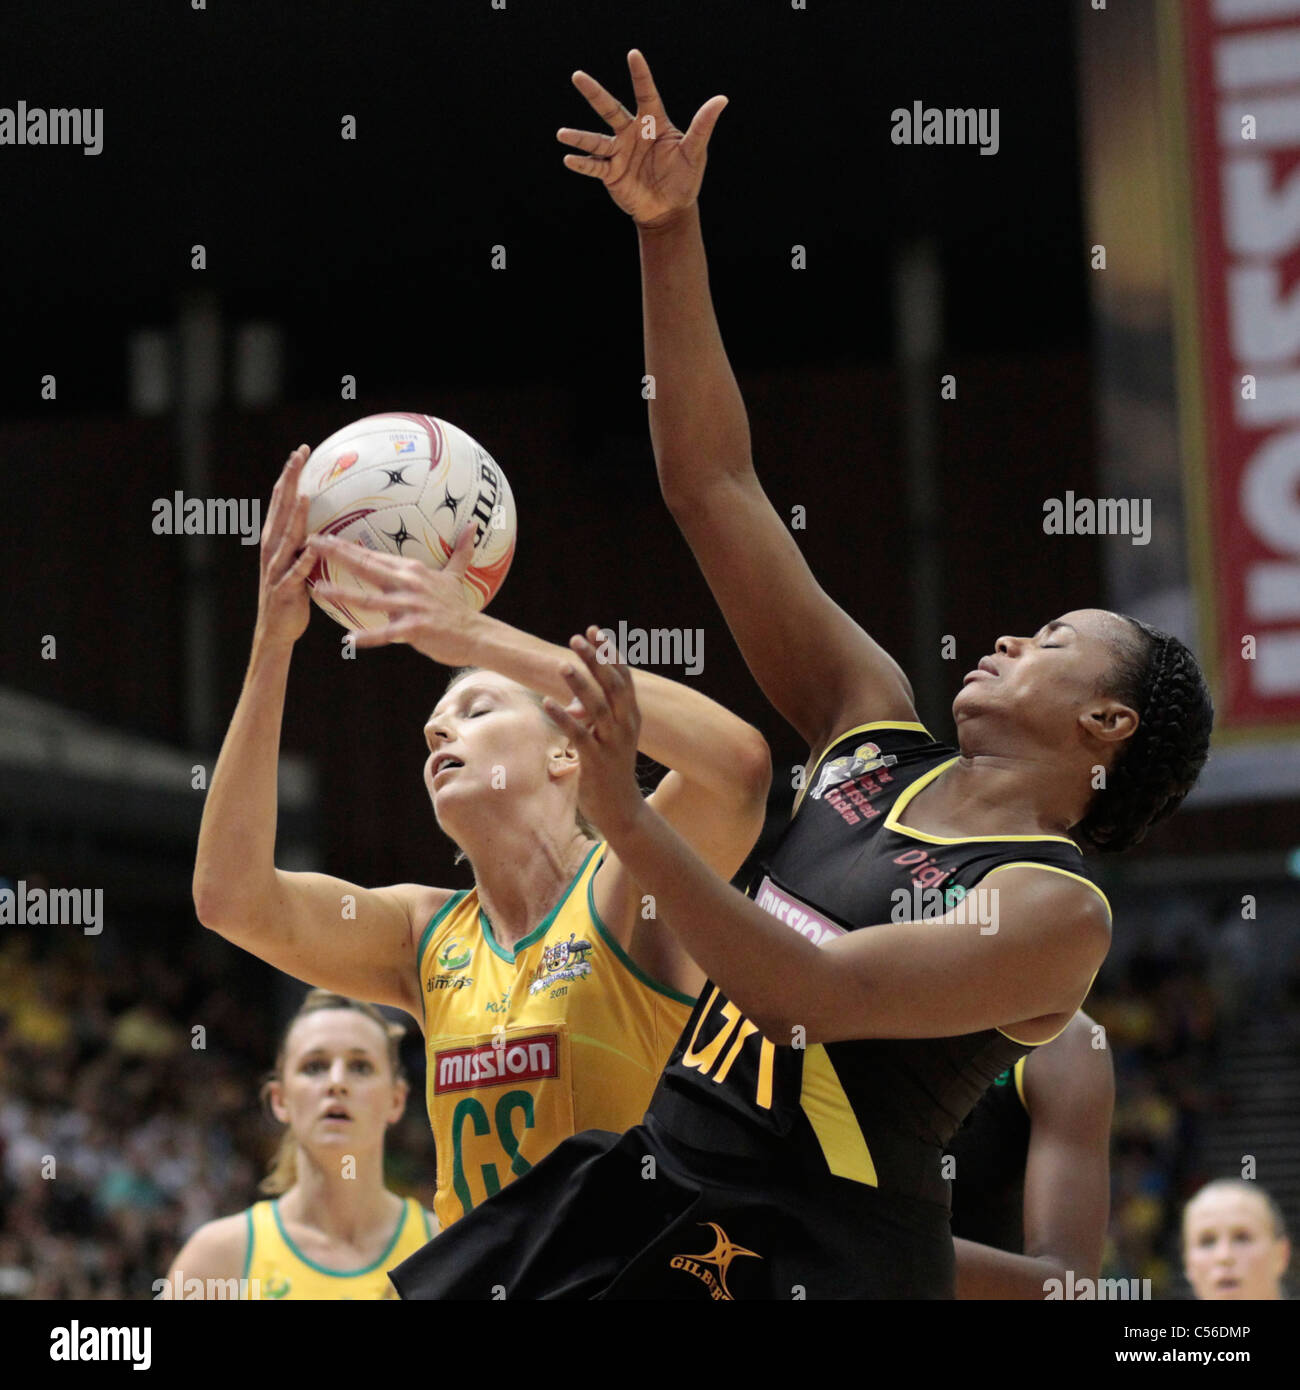 09.07.2011 Catherine Cox of Australia(left) battles with Althea Byfield for the ball during the Semi-finals between Australia and Jamaica, Mission Foods World Netball Championships 2011 from the Singapore Indoor Stadium in Singapore. Stock Photo